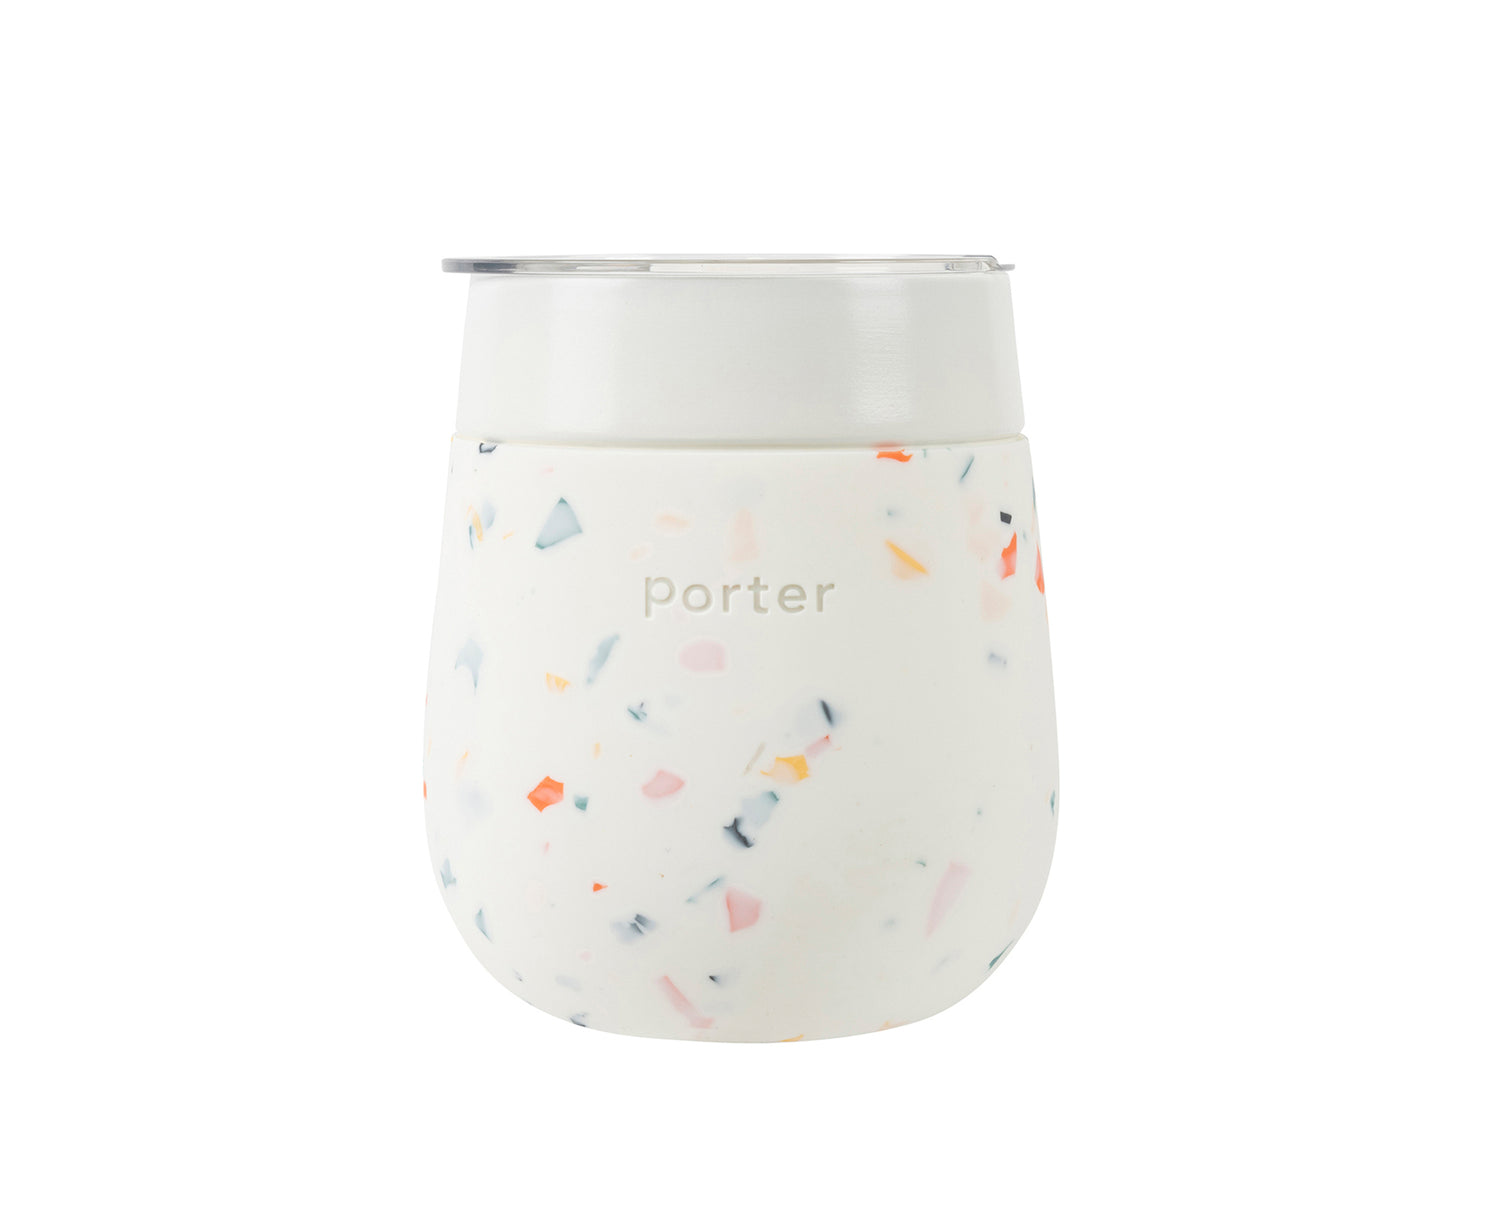 Porter Ceramic Stainless Steel Cup in Cream Terrazzo by W&amp;P